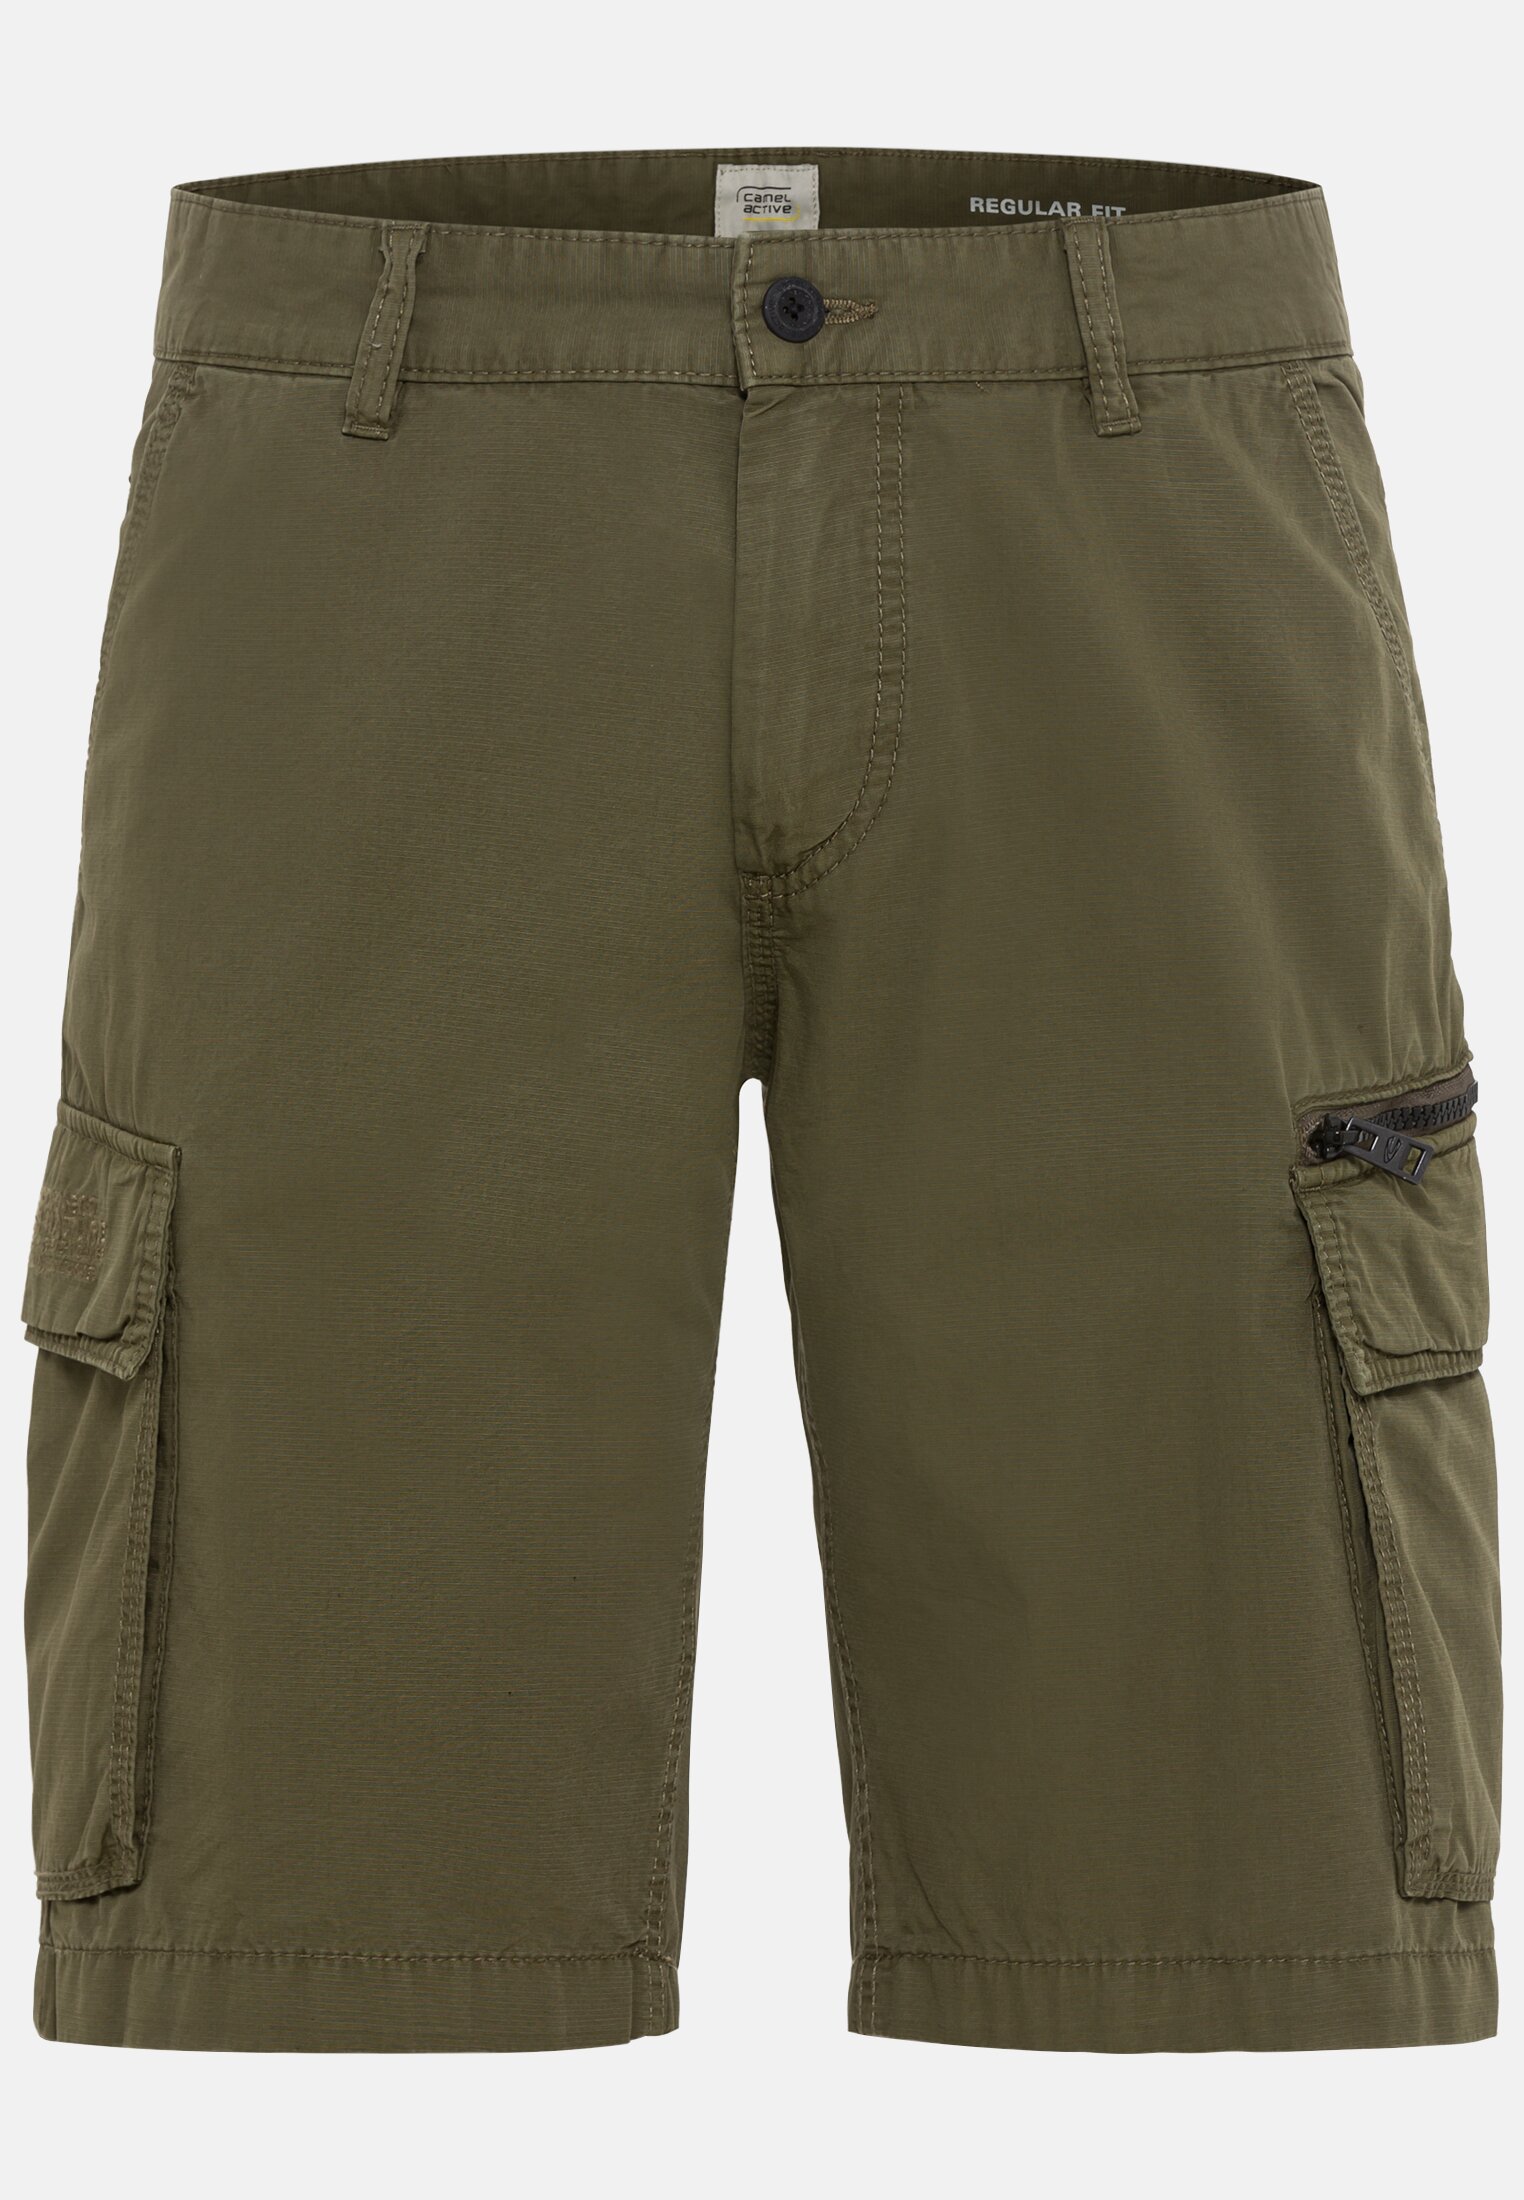 Camel Active Cargo shorts made from pure cotton